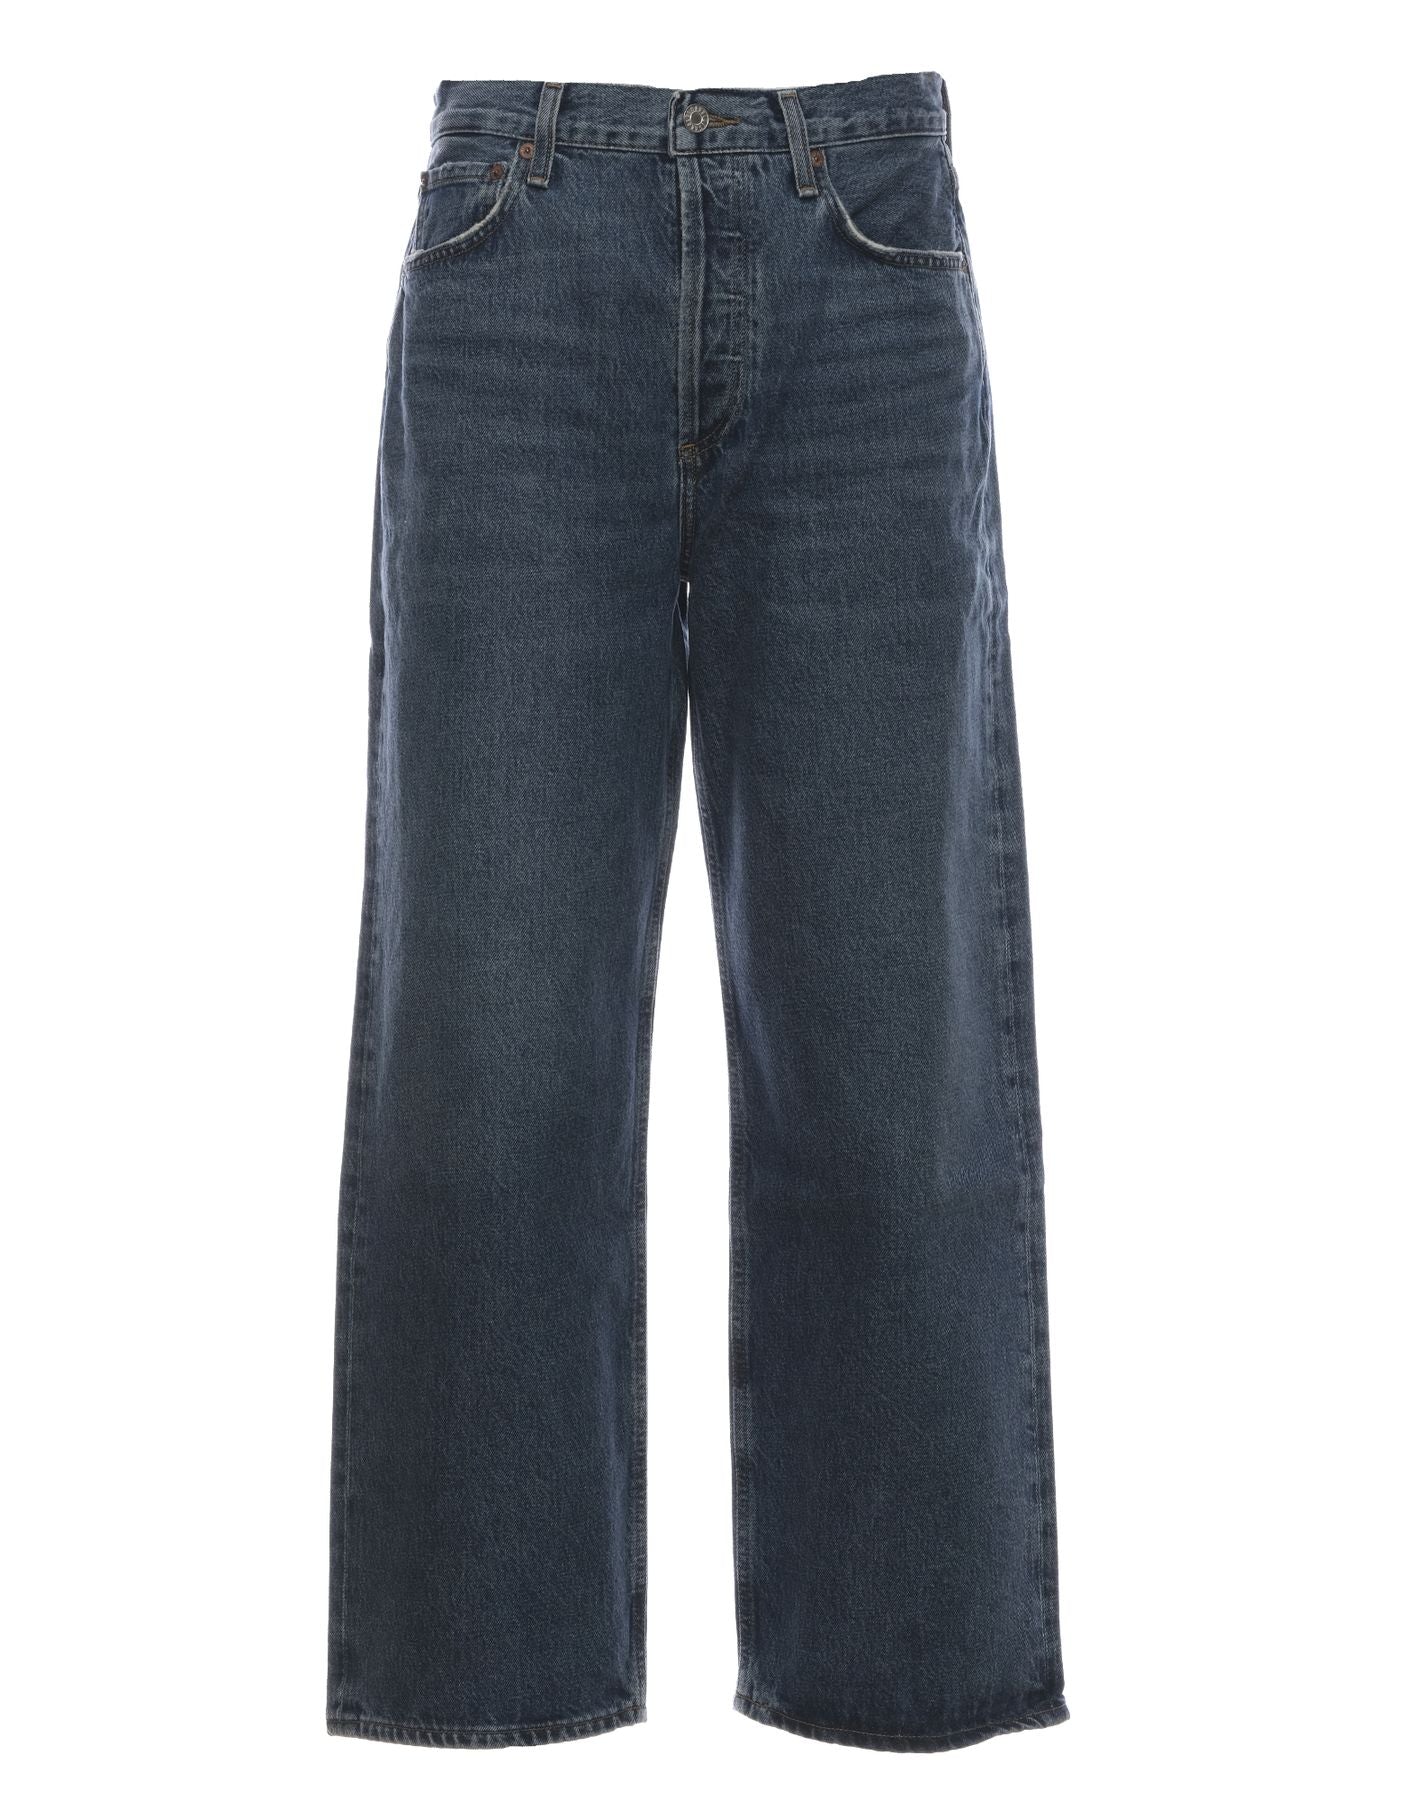 Jeans for woman A9087B-1141 IMAGE Agolde